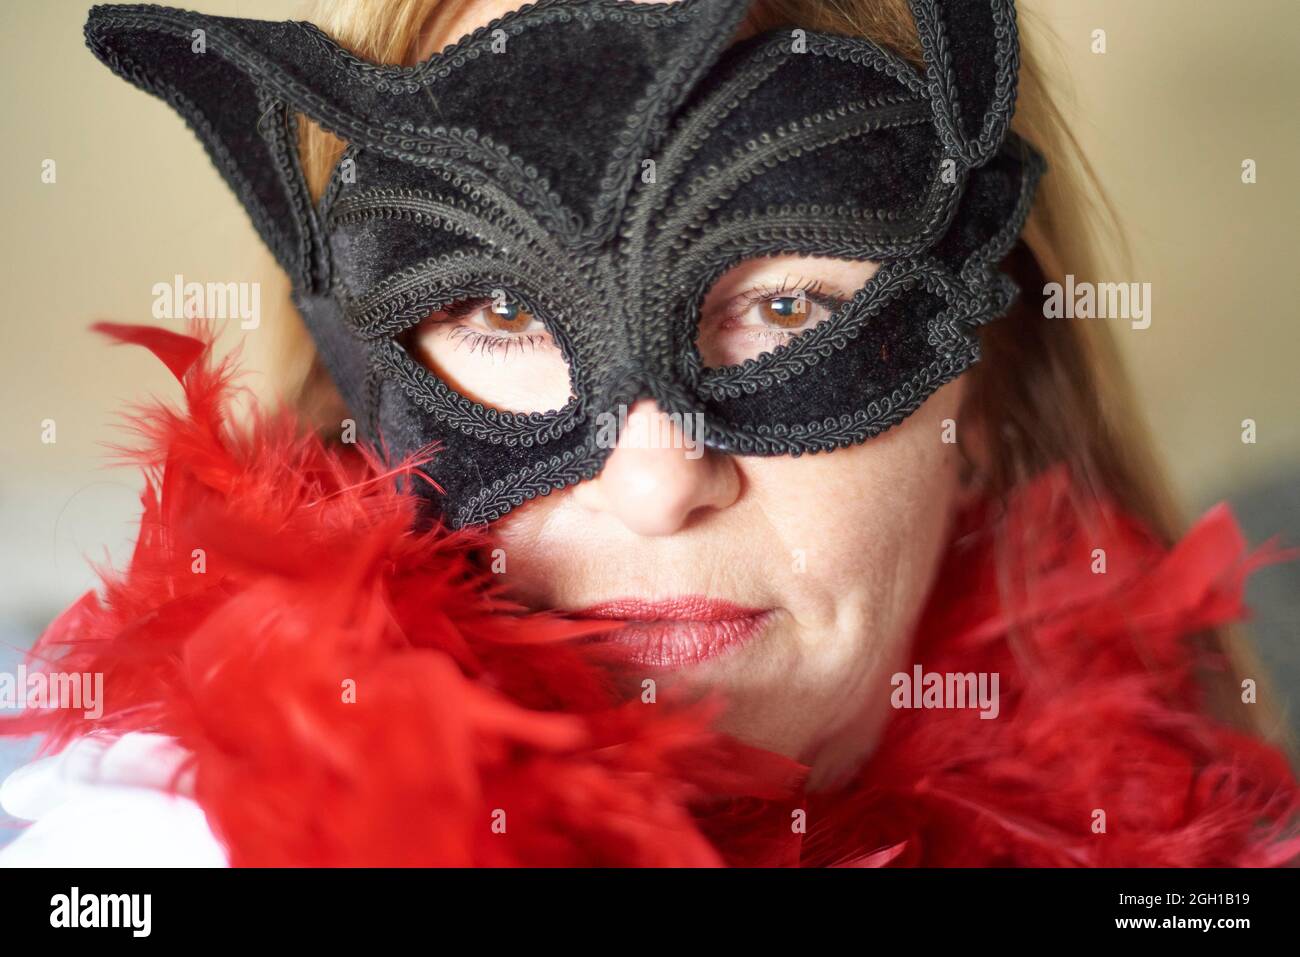 Portrait of a fifty plus years old woman with brown eyes wearing a slightly askew textured black mask and red feather boa. Stock Photo